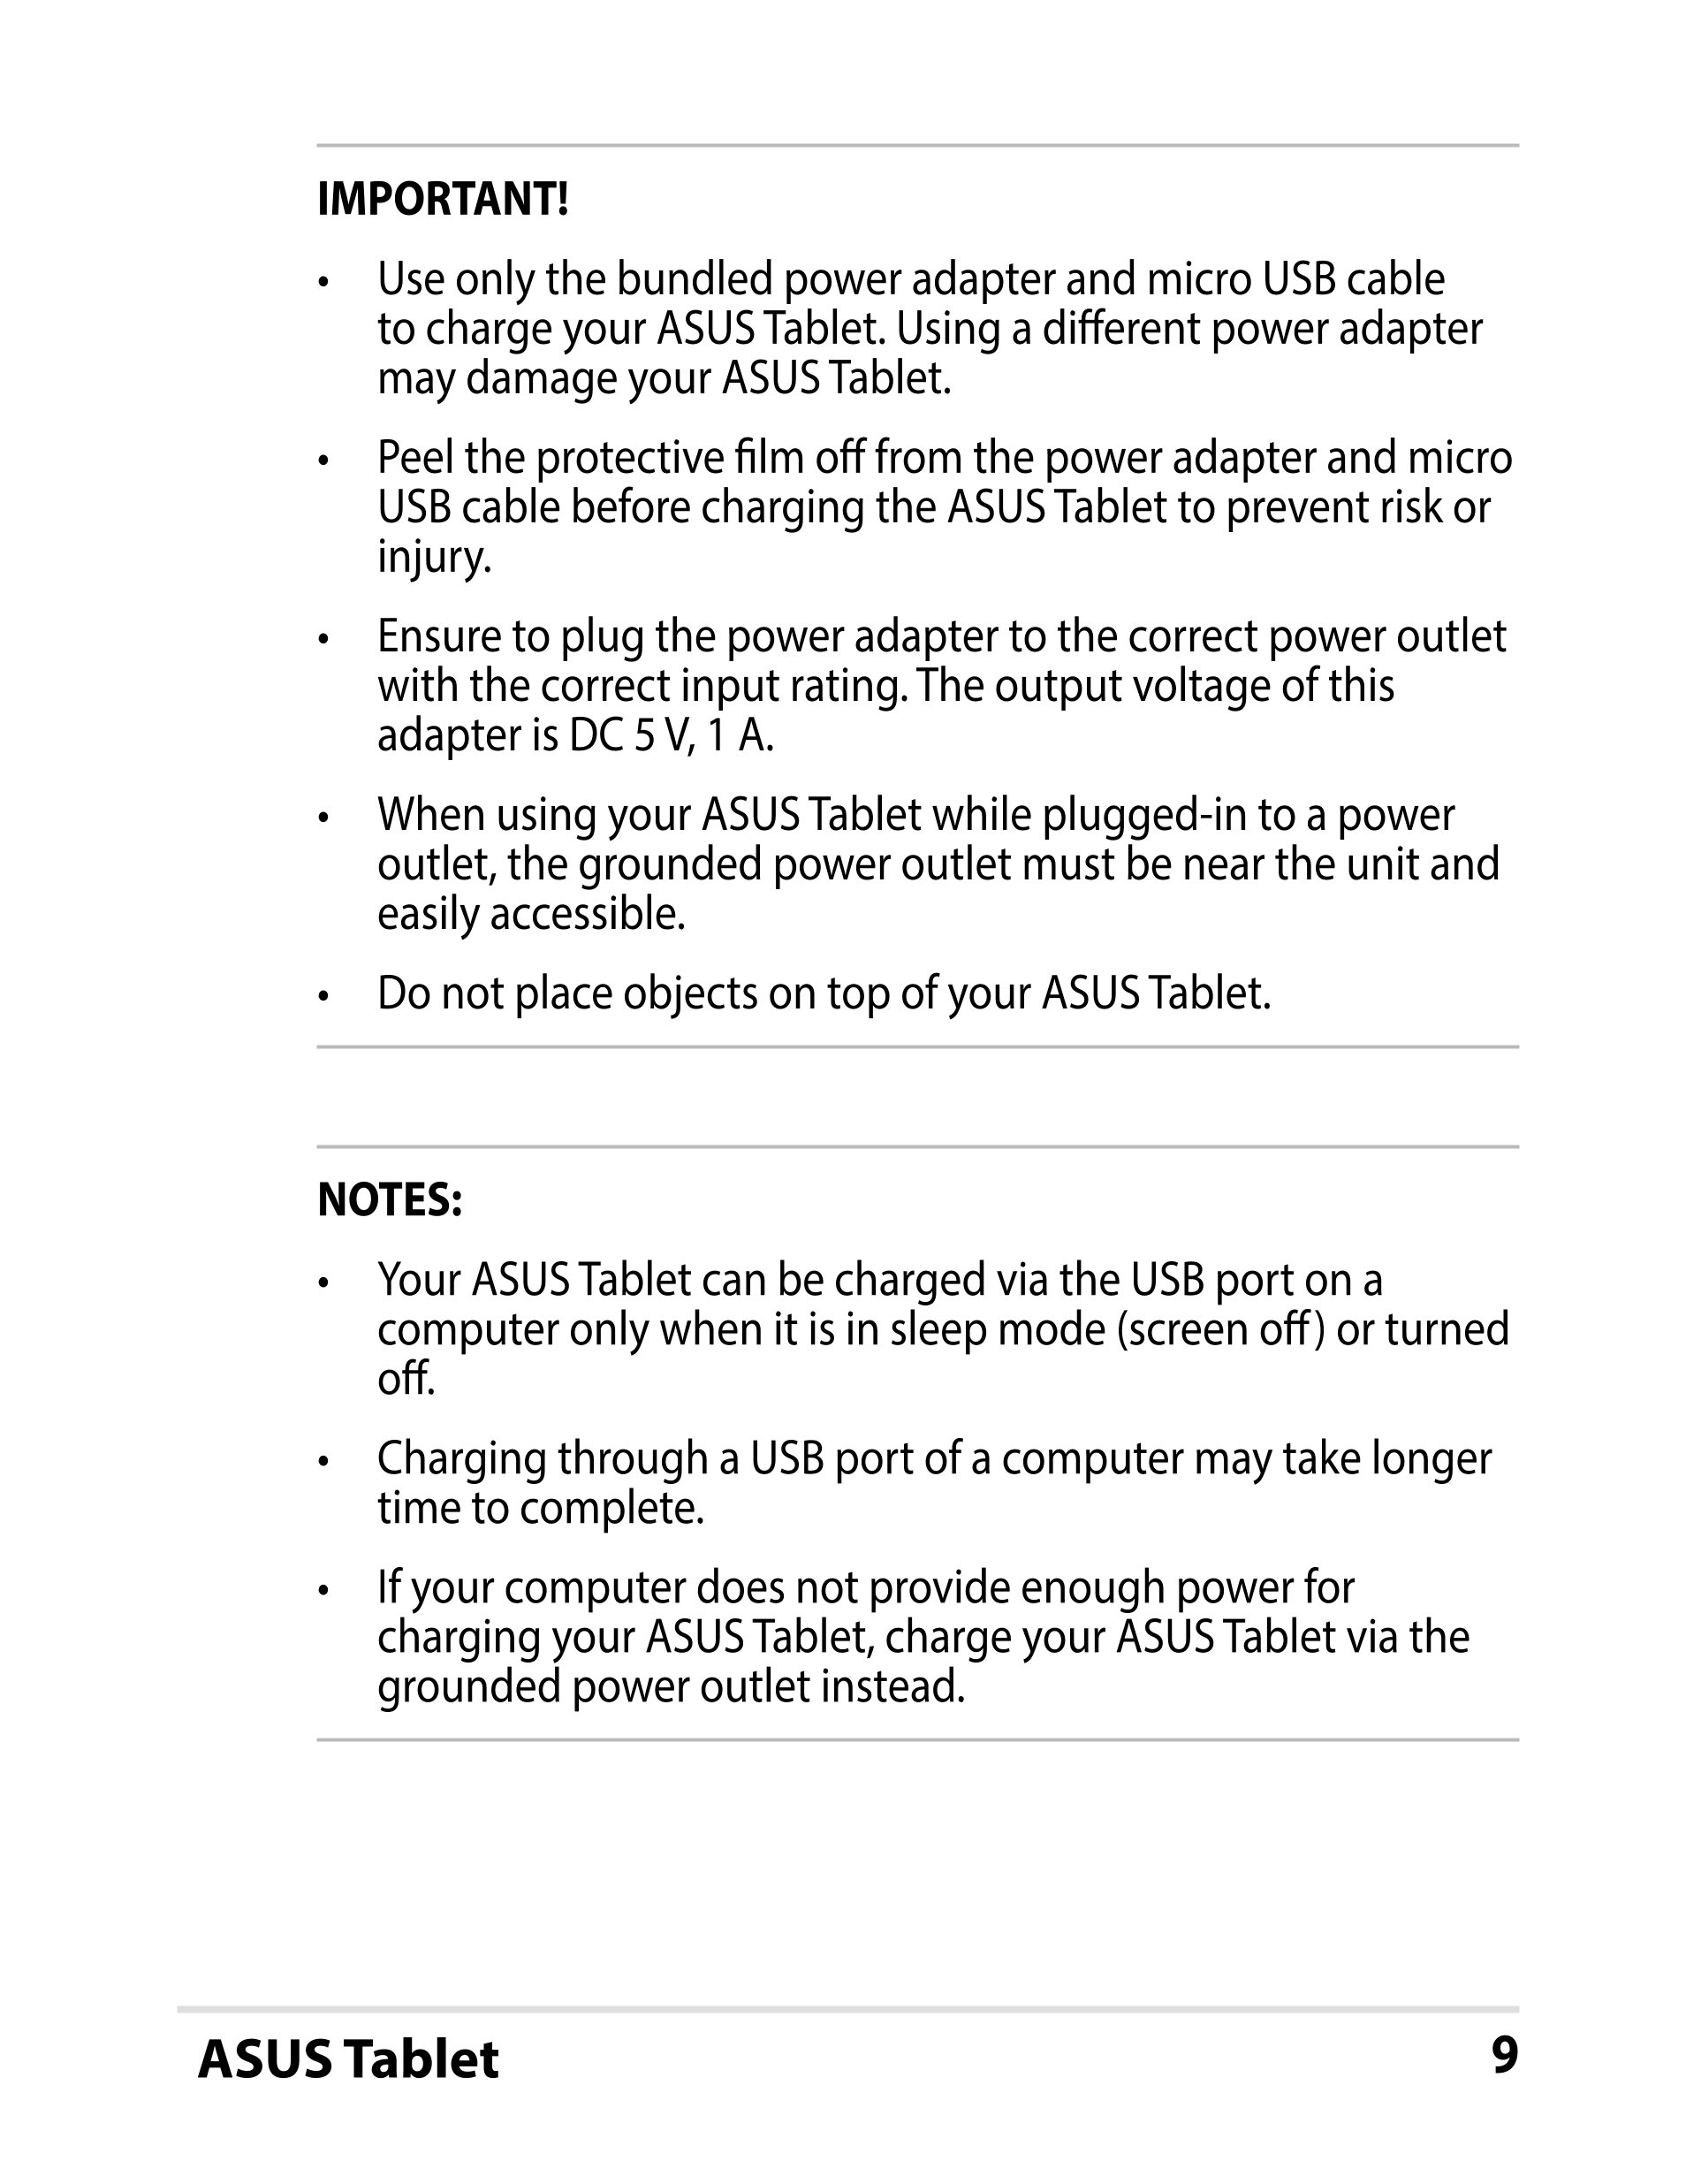 IMPORTANT!
•     Use only the bundled power adapter and micro USB cable 
to charge your ASUS Tablet. Using a diﬀerent power adap